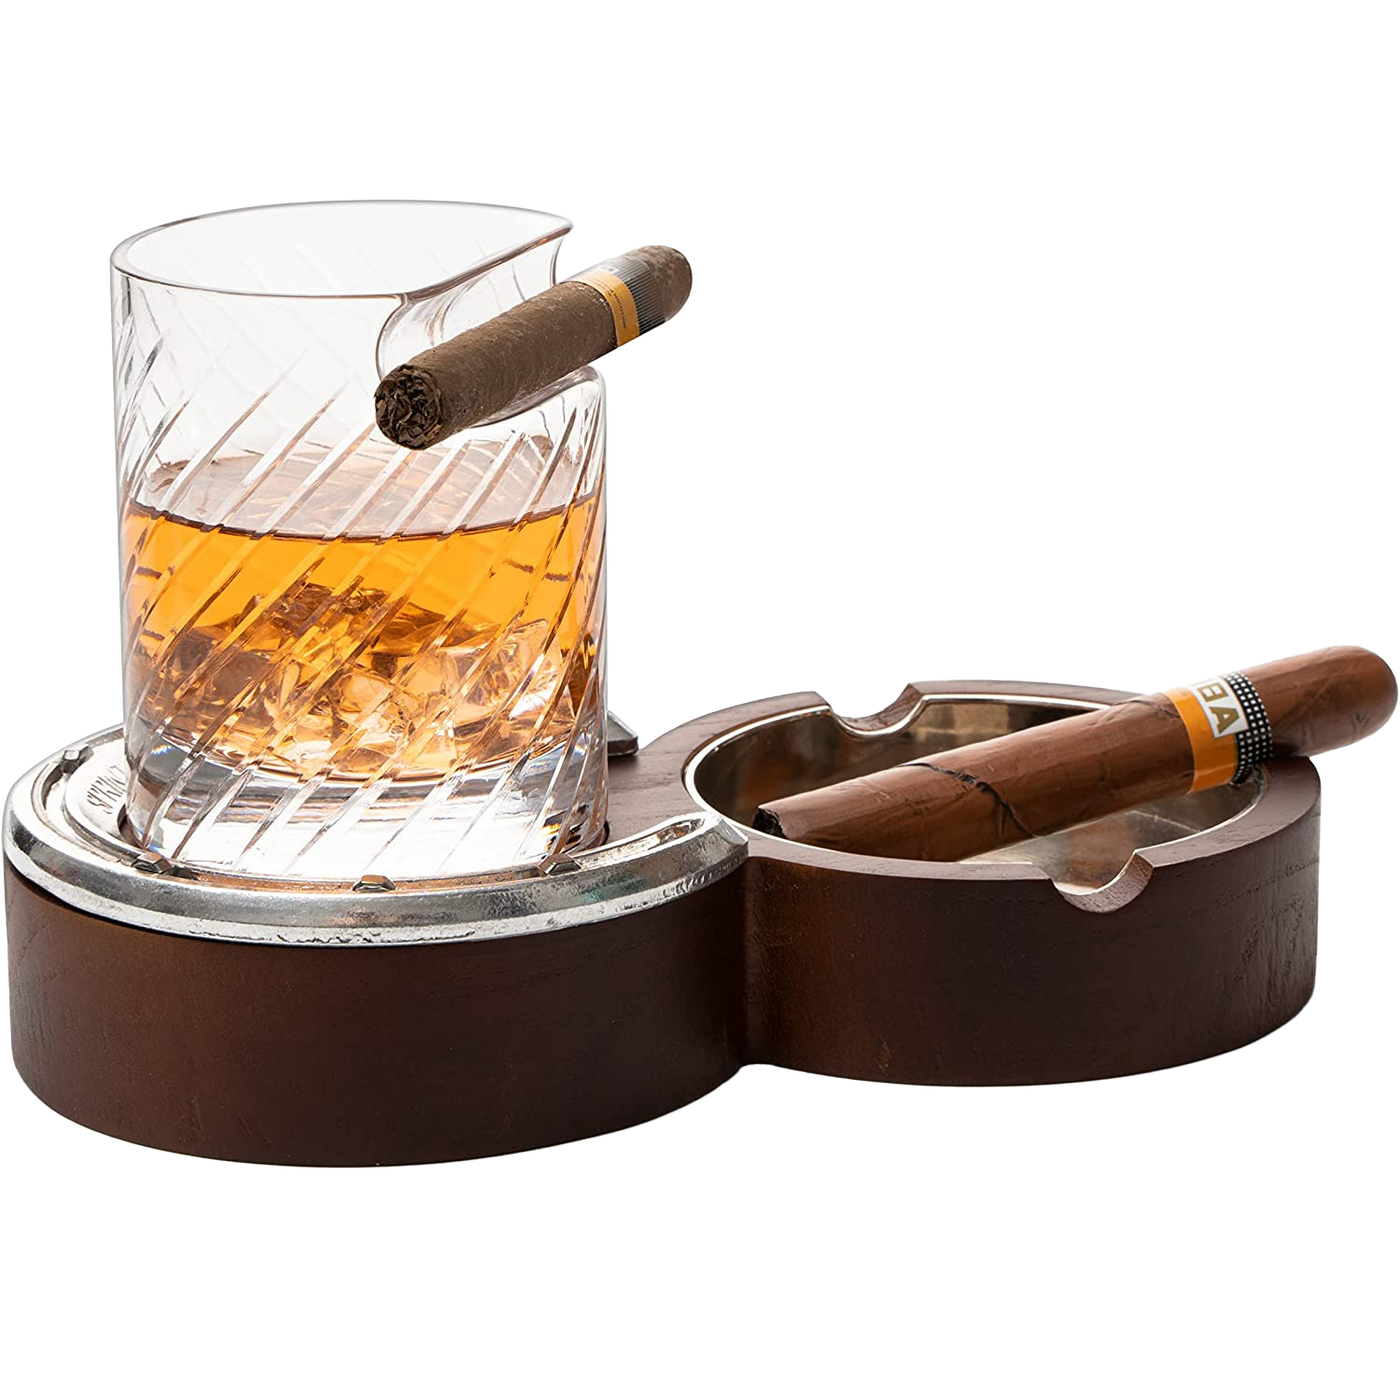 Liquor Lux Luxurious Cigar Glass - In A Leather Horseshoe Storage Case Whiskey Glassware with Cigar Holder - 10oz Cigar Holder Whiskey, Ash Tray - Dad, Men Home Office, Leather Gifts